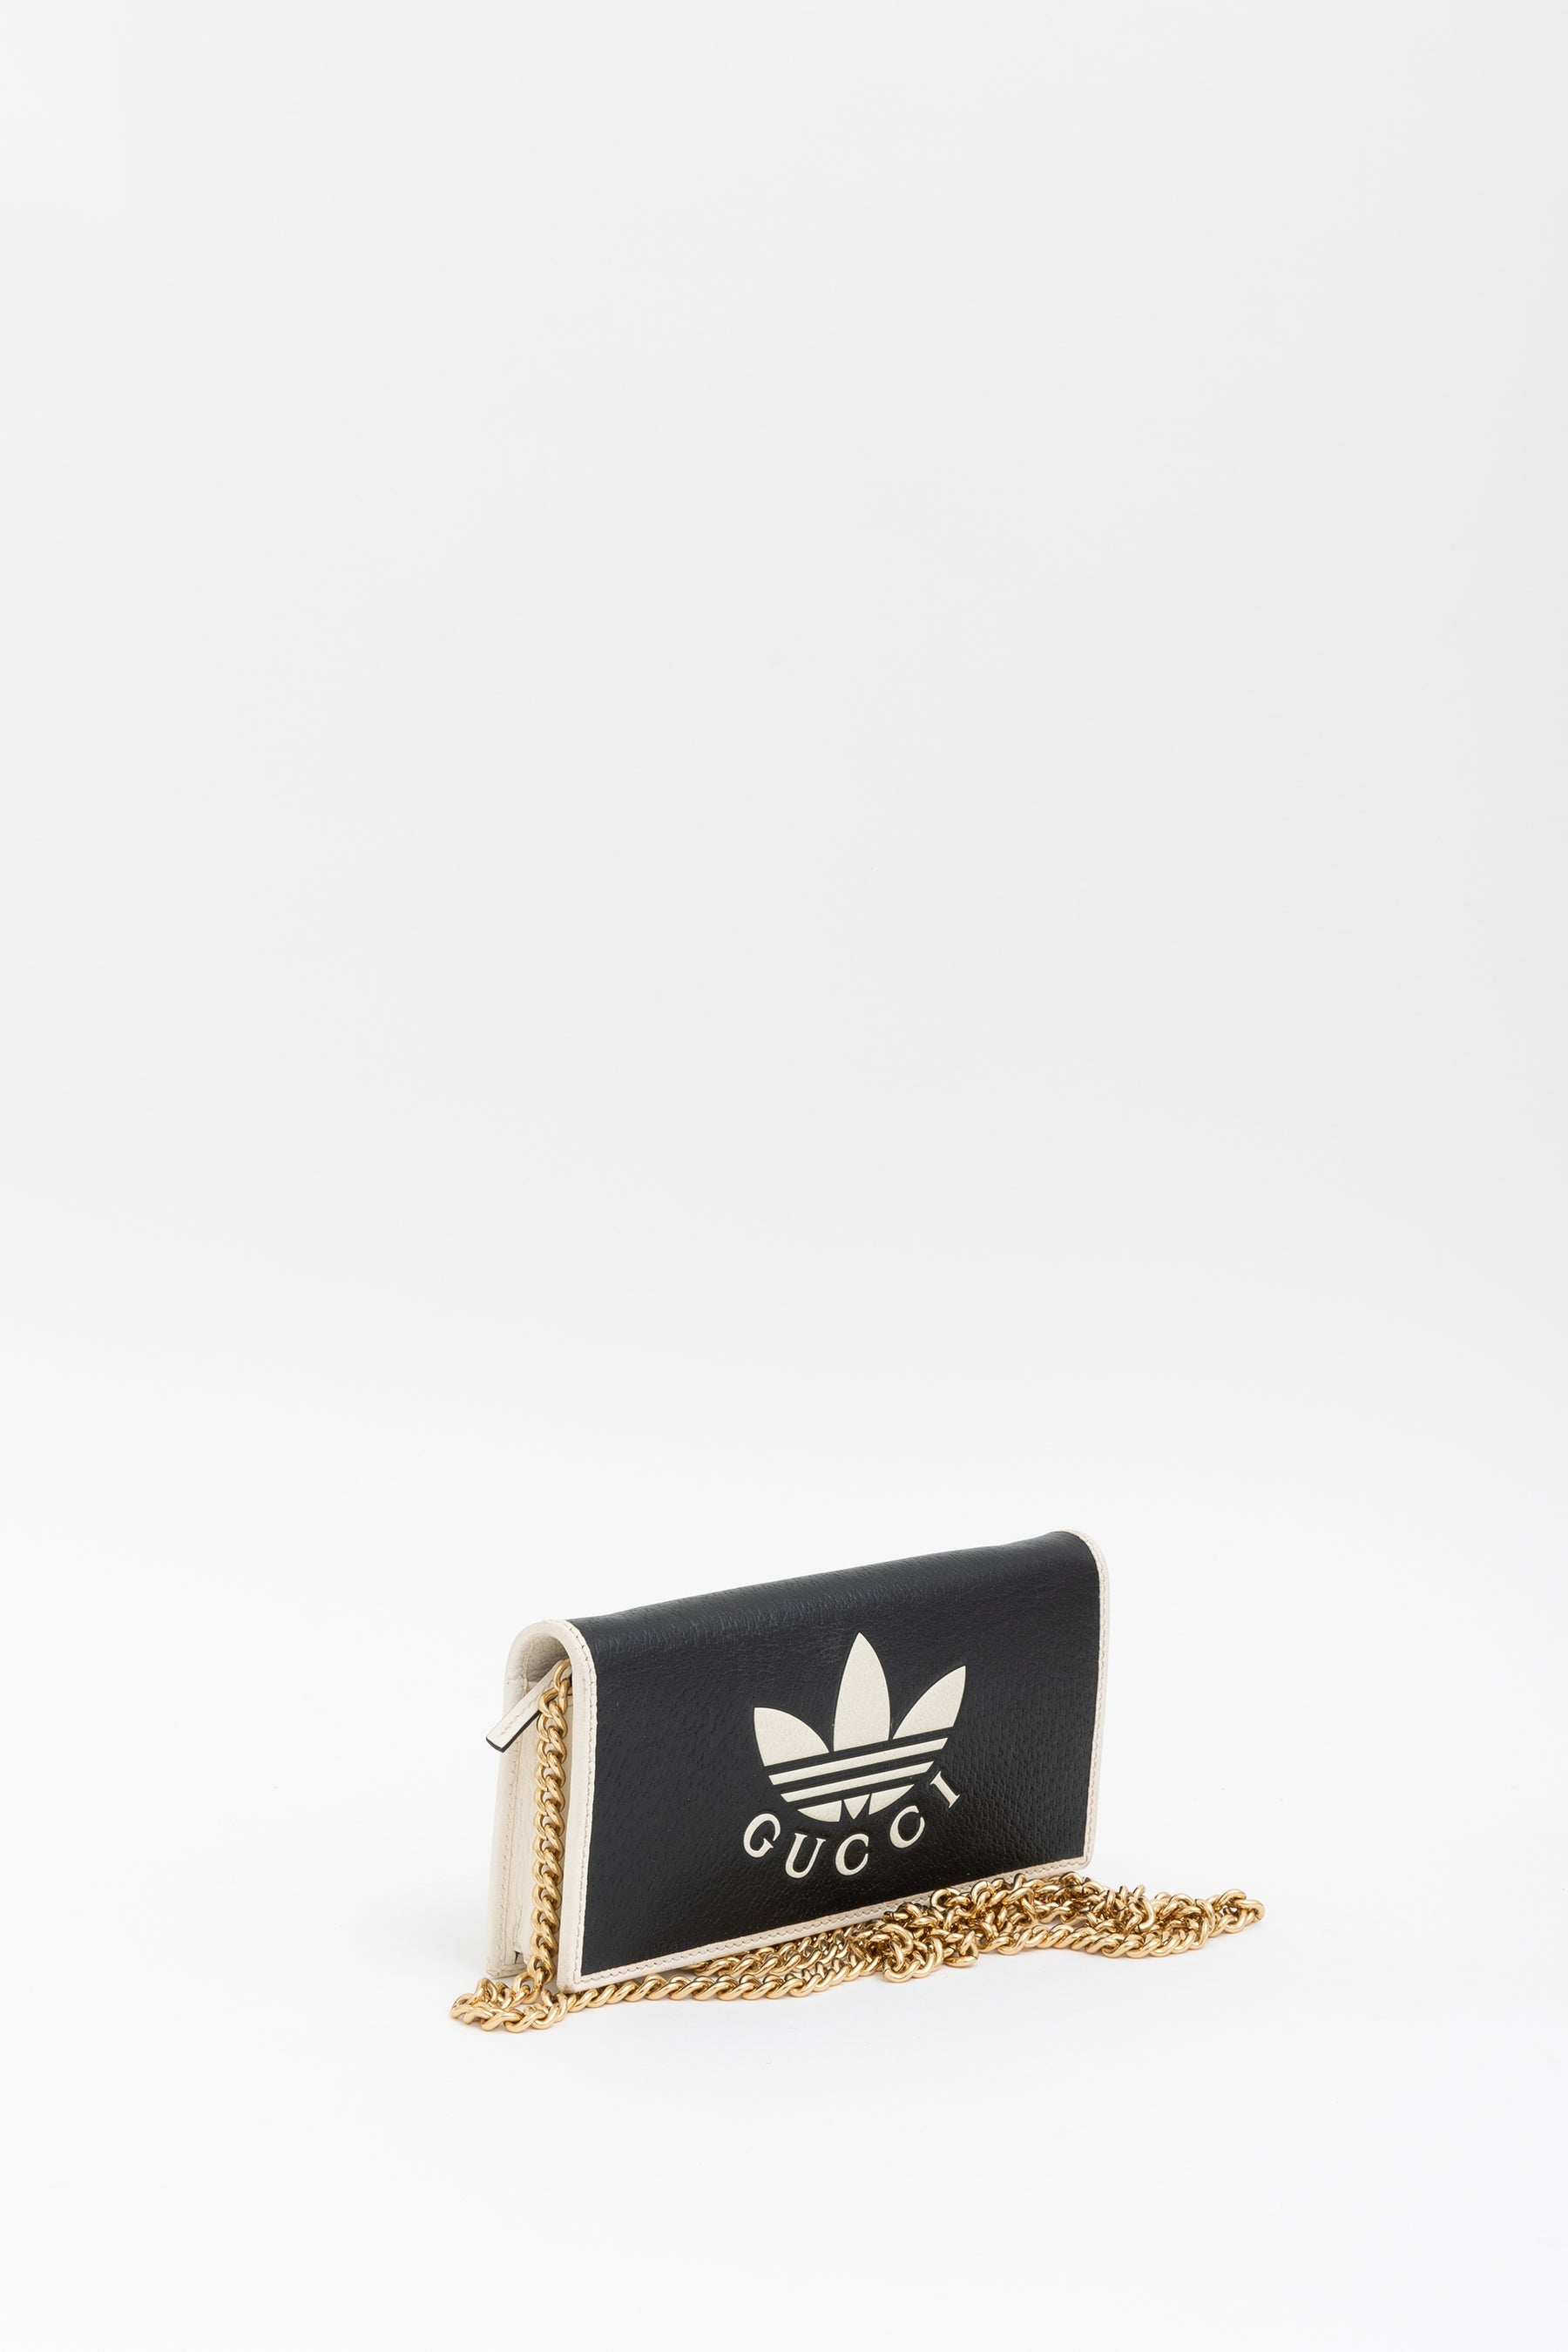 Adidas Collaboration Wallet on Chain Bag